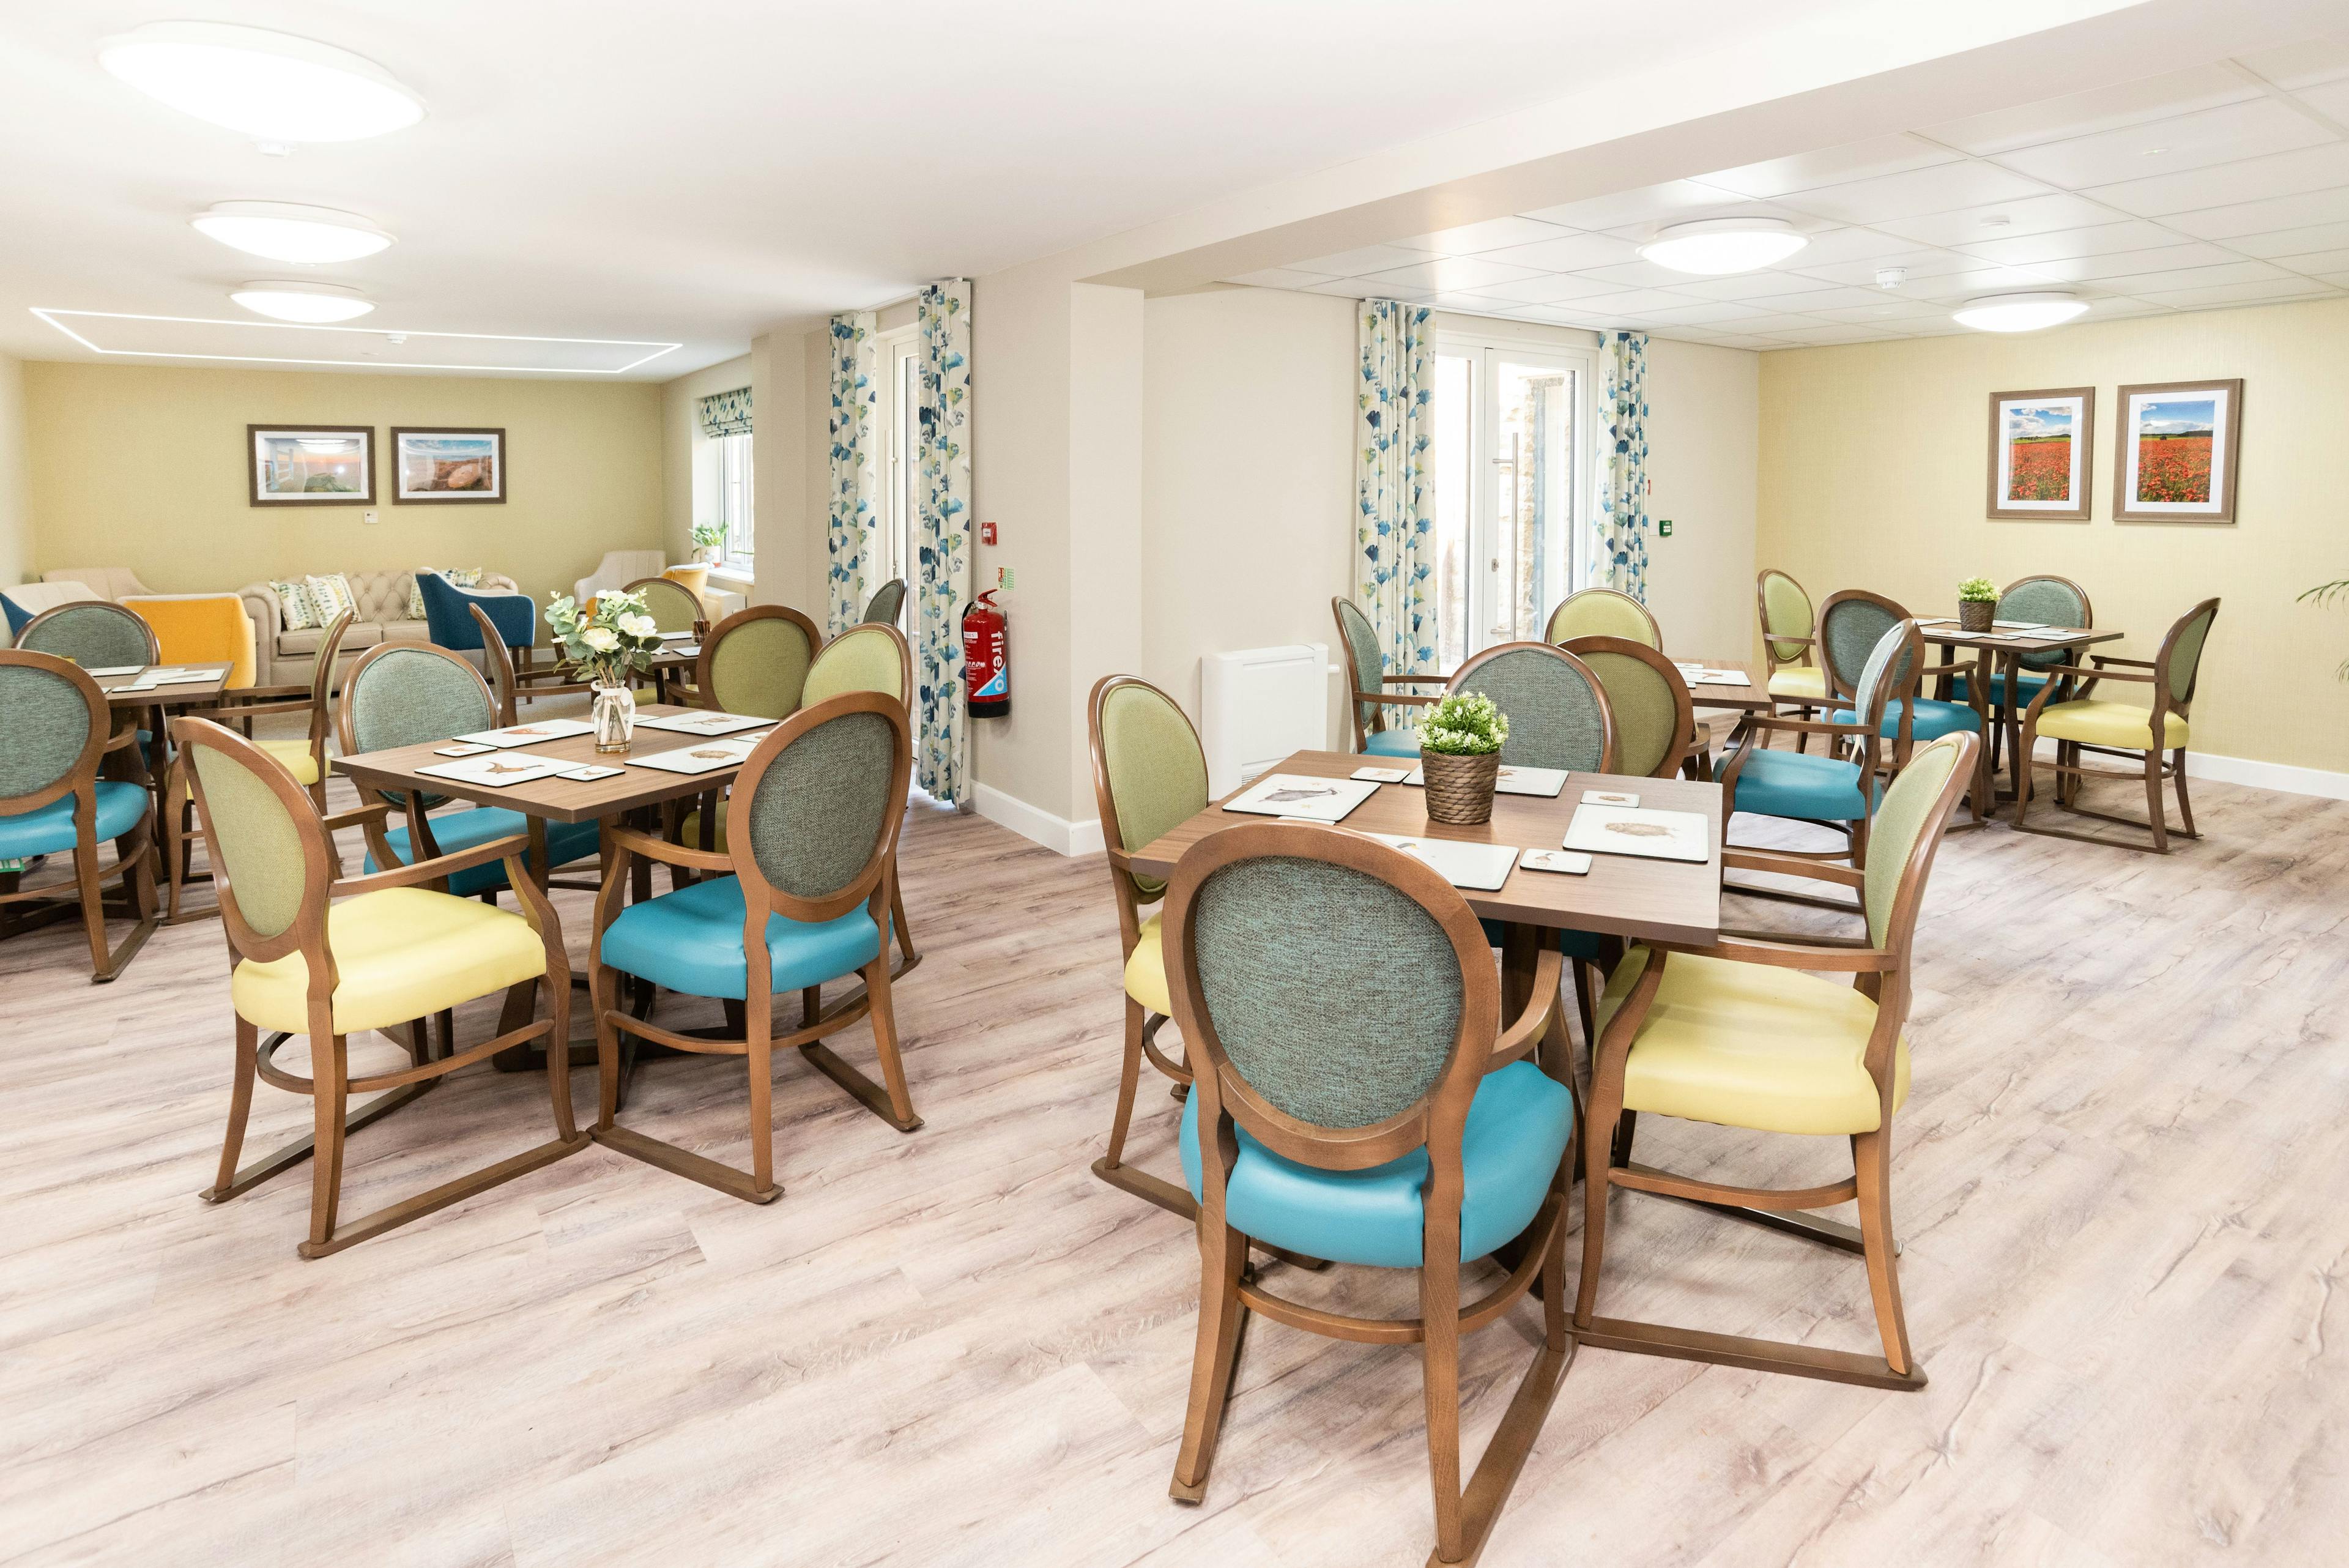 Dining Area at Valley Lodge Care Home in Matlock, Derbyshire